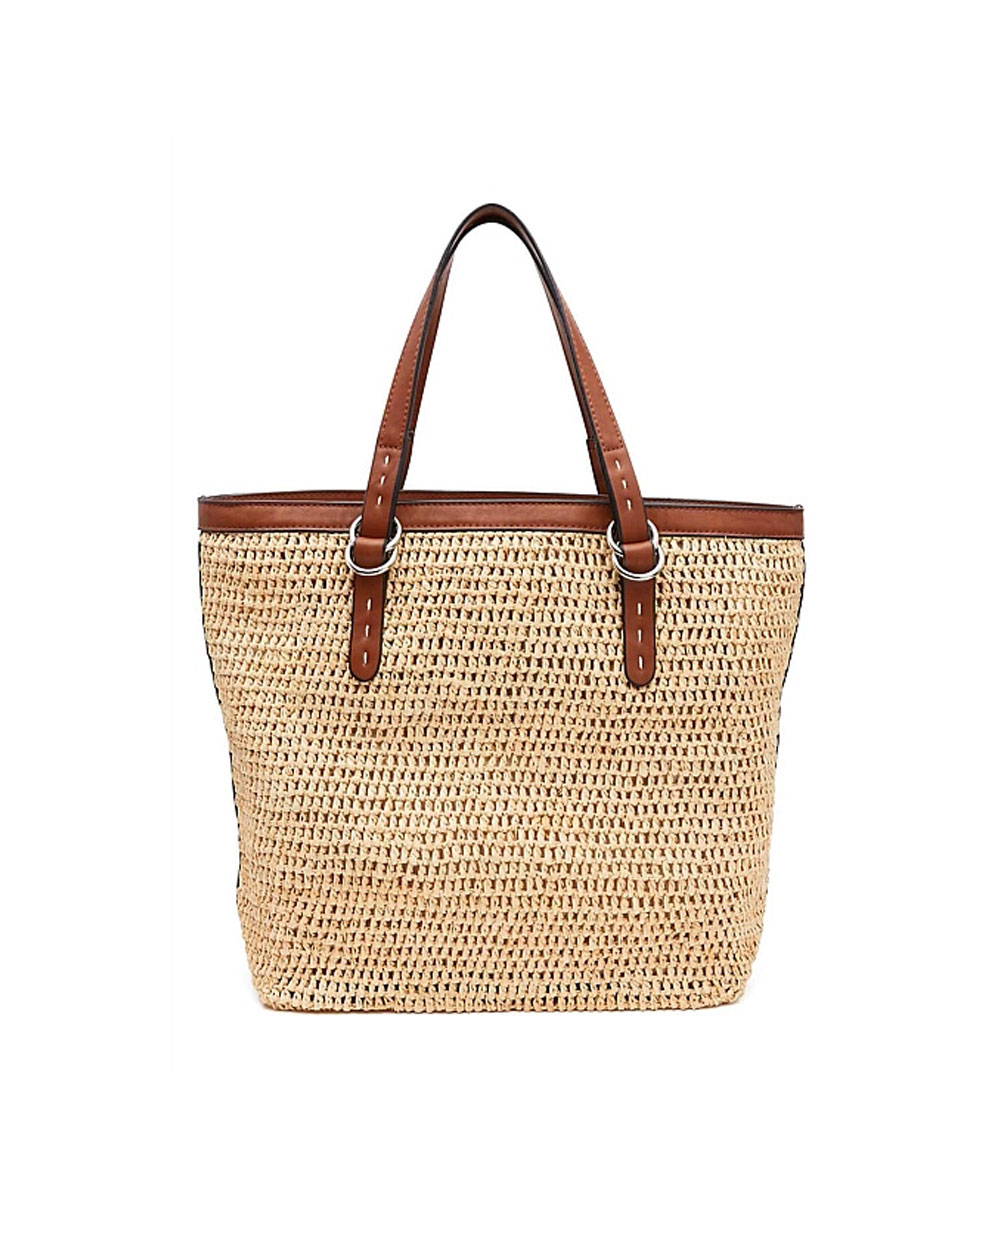 THE BEACH BAG: $139.90 from Witchery